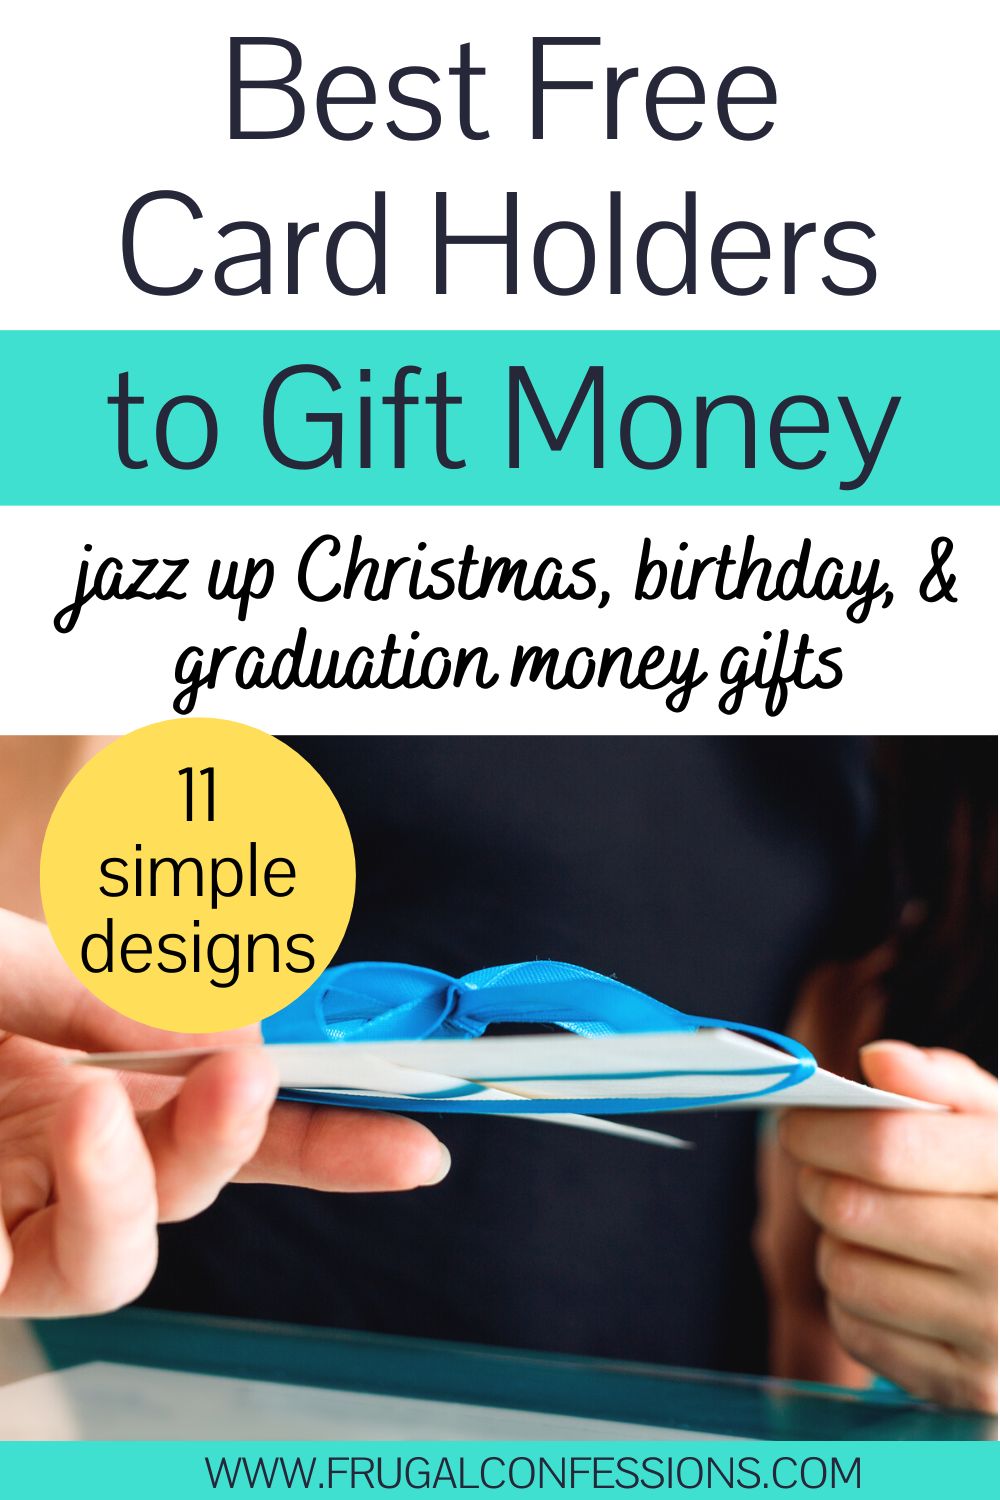 two people exchanging a money gift in blue ribboned envelope, text overlay "best free card holders to gift money"